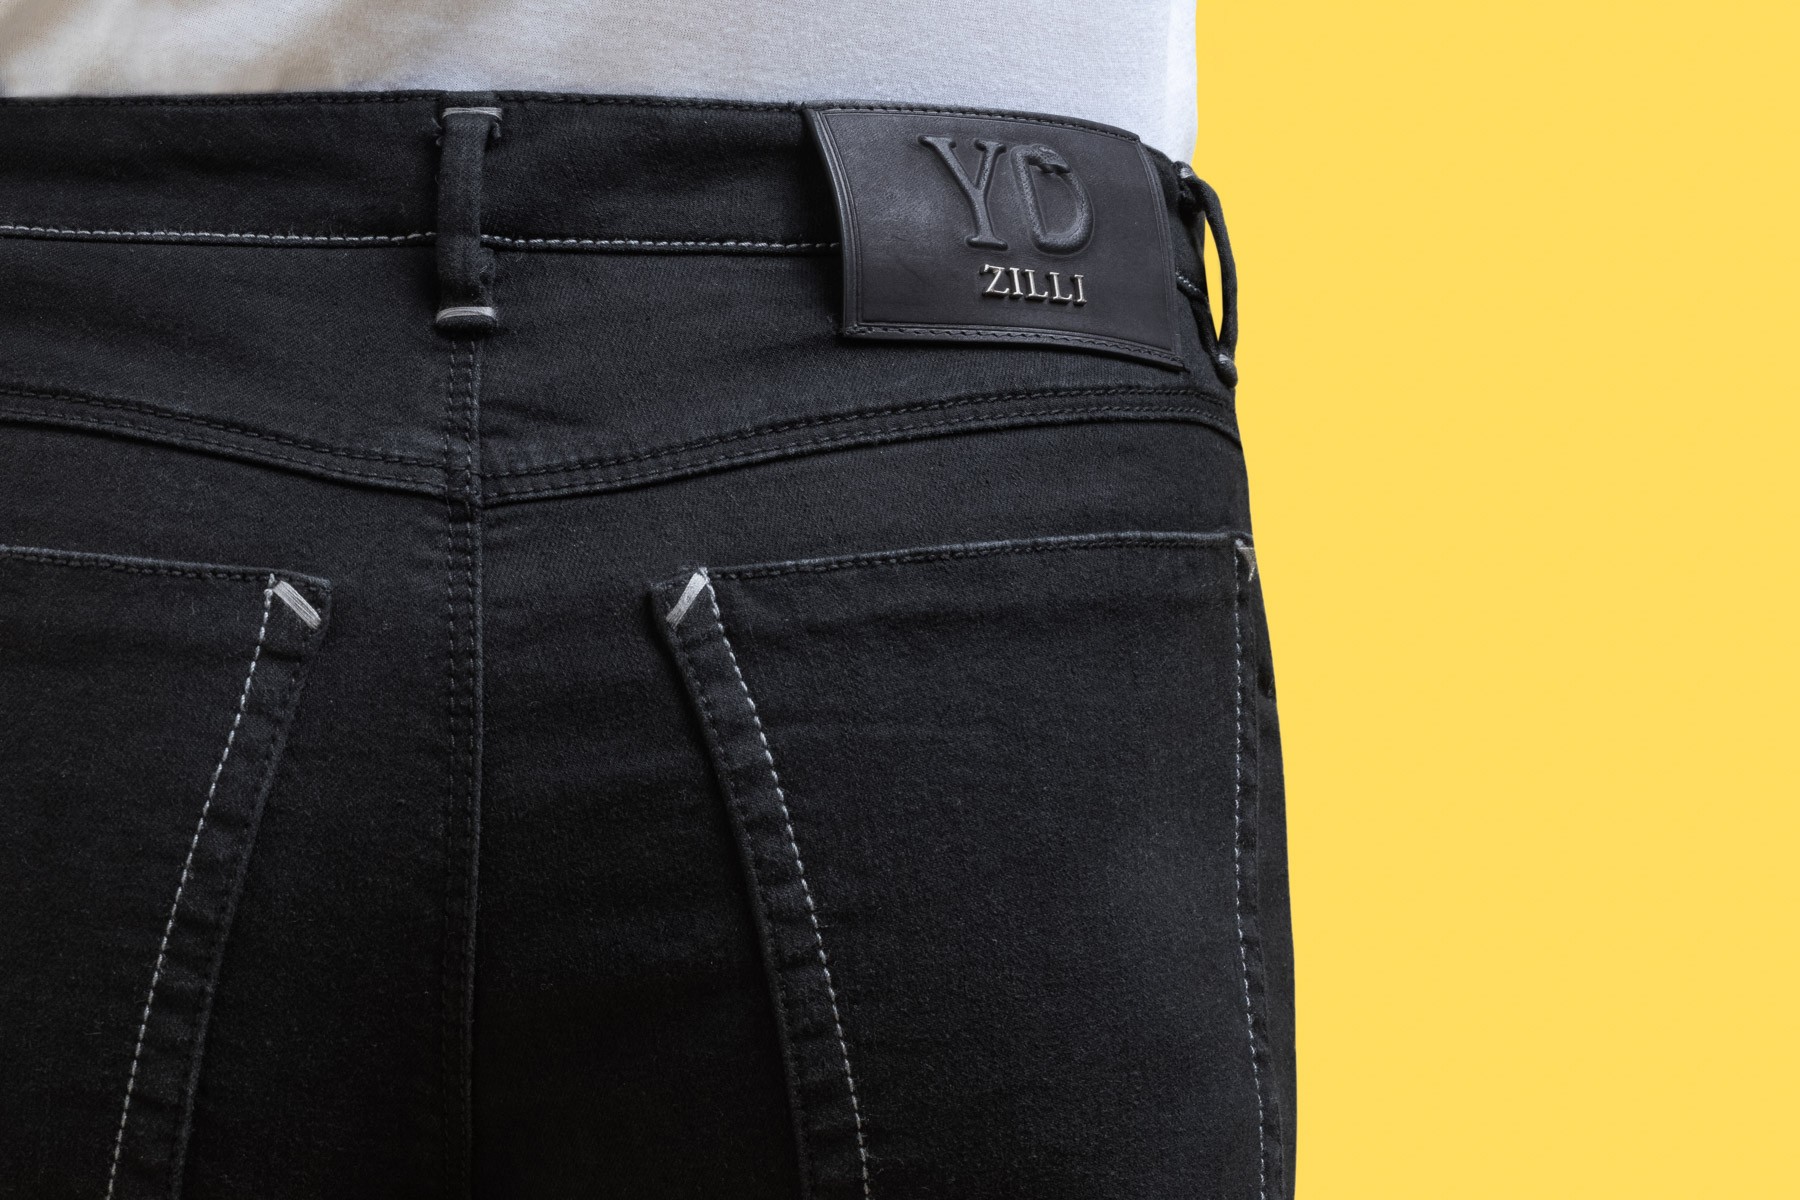 zilli jeans